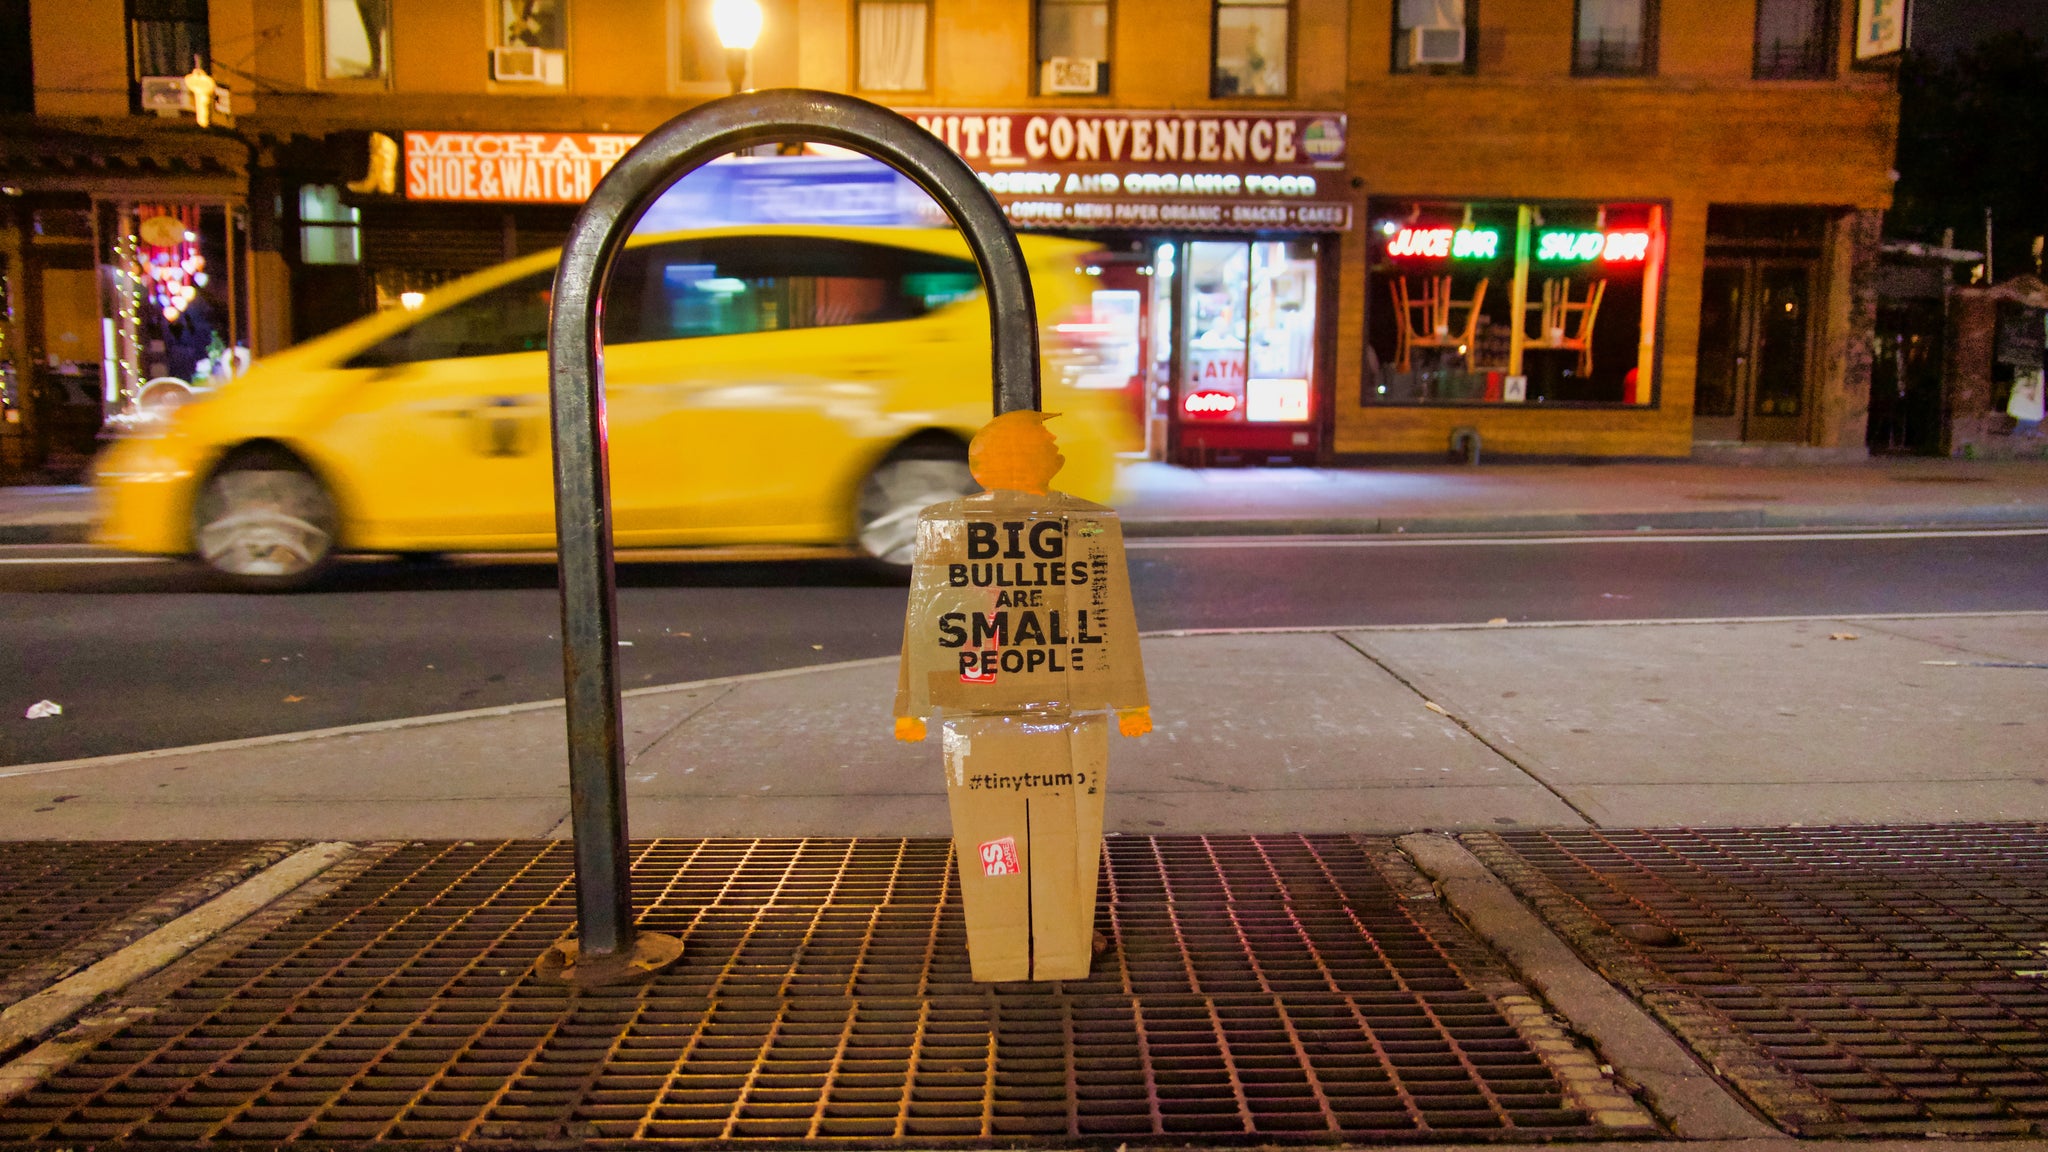 A two foot tall, cardboard tiny trump with the slogan "Big Bullies Are Small People", leaning against a bike rack on the street in New York City